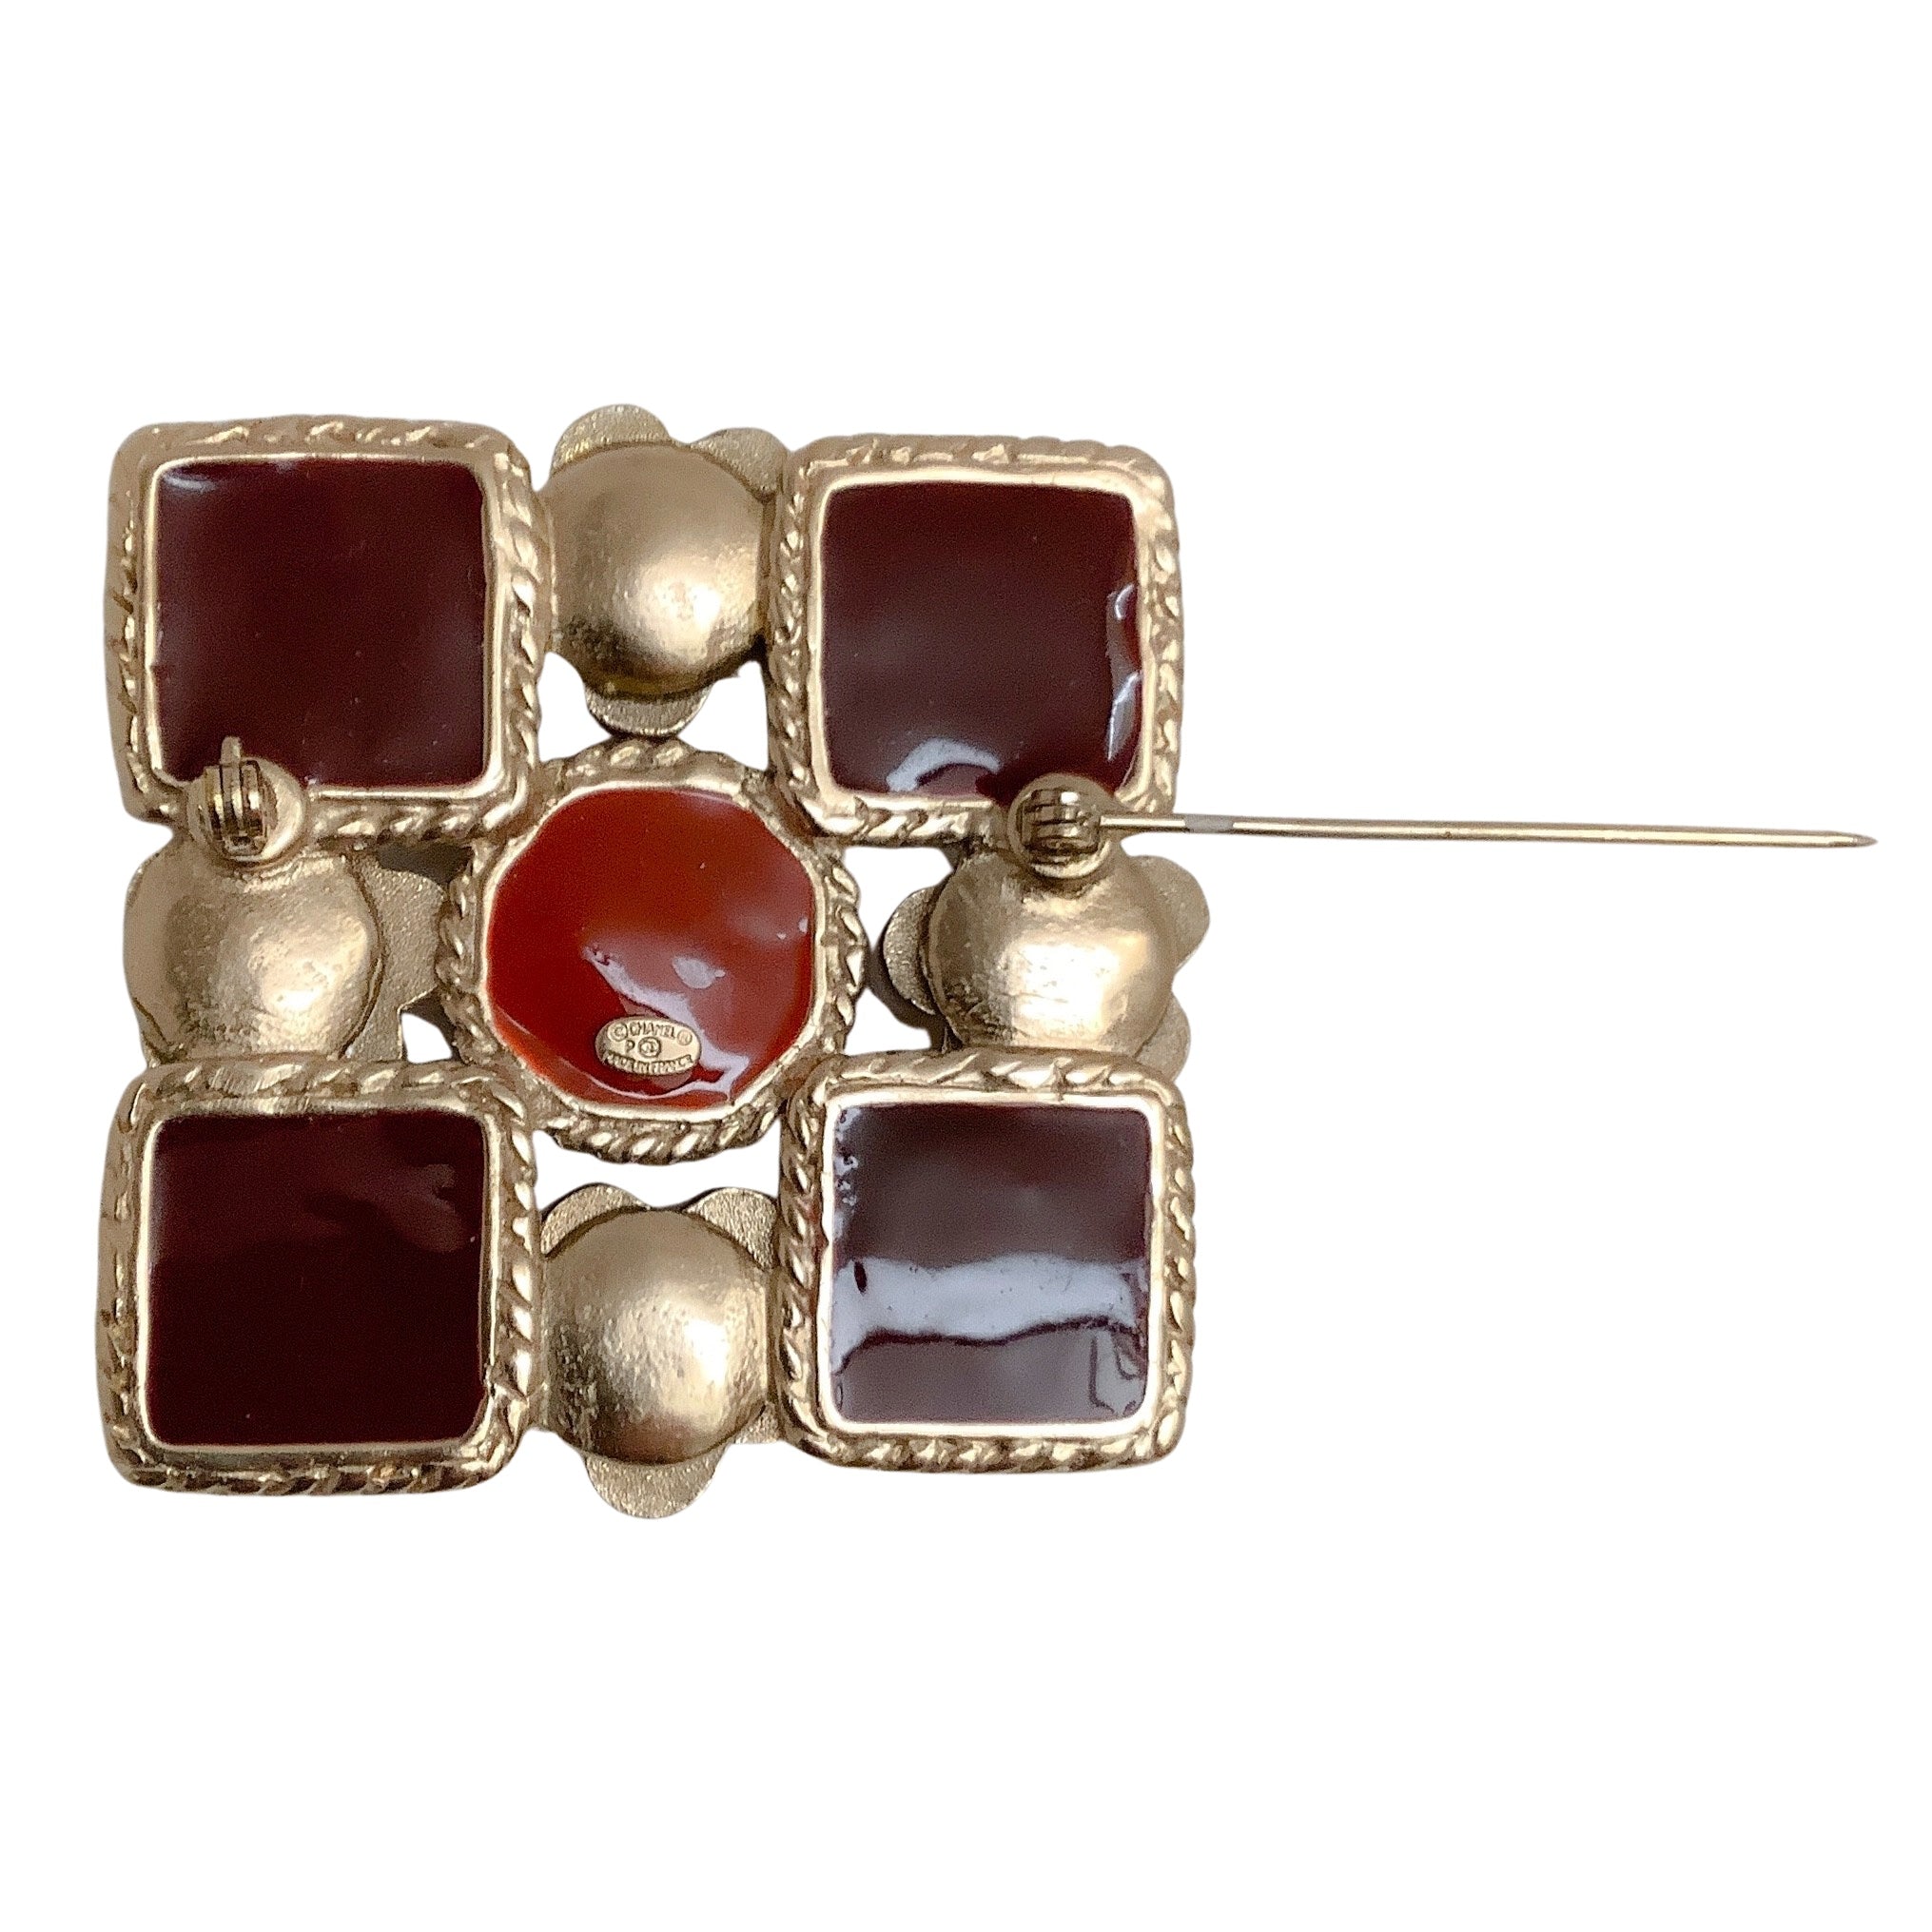 Chanel Burgundy Gripoix and Pearl Square Brooch